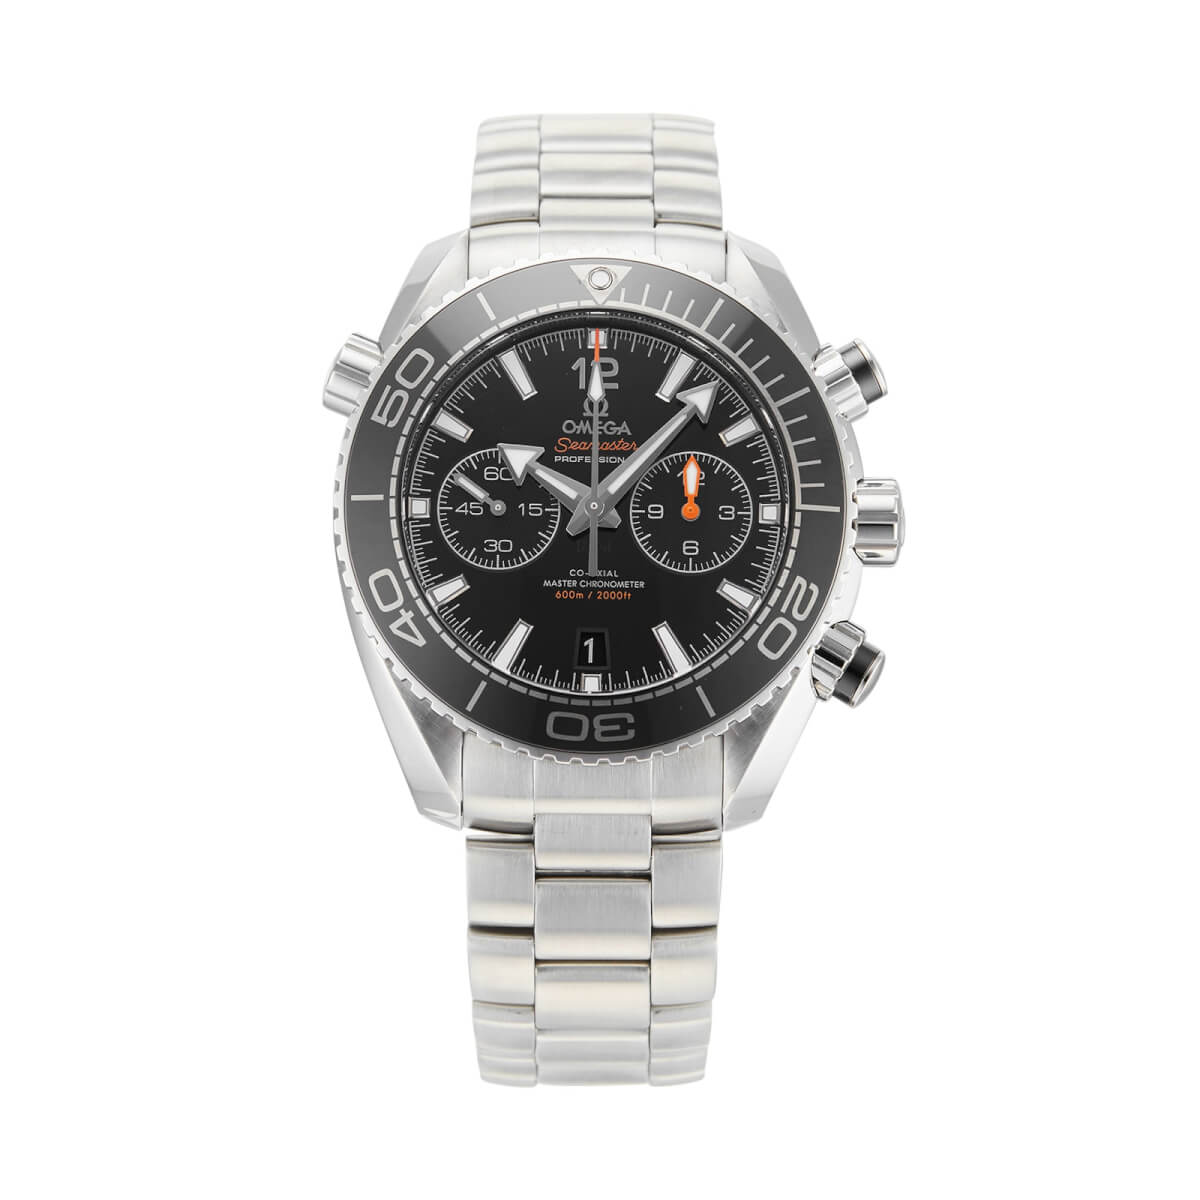 Pre-Owned Omega Seamaster Planet Ocean 600M Mens Watch 215.30.46.51.01.001